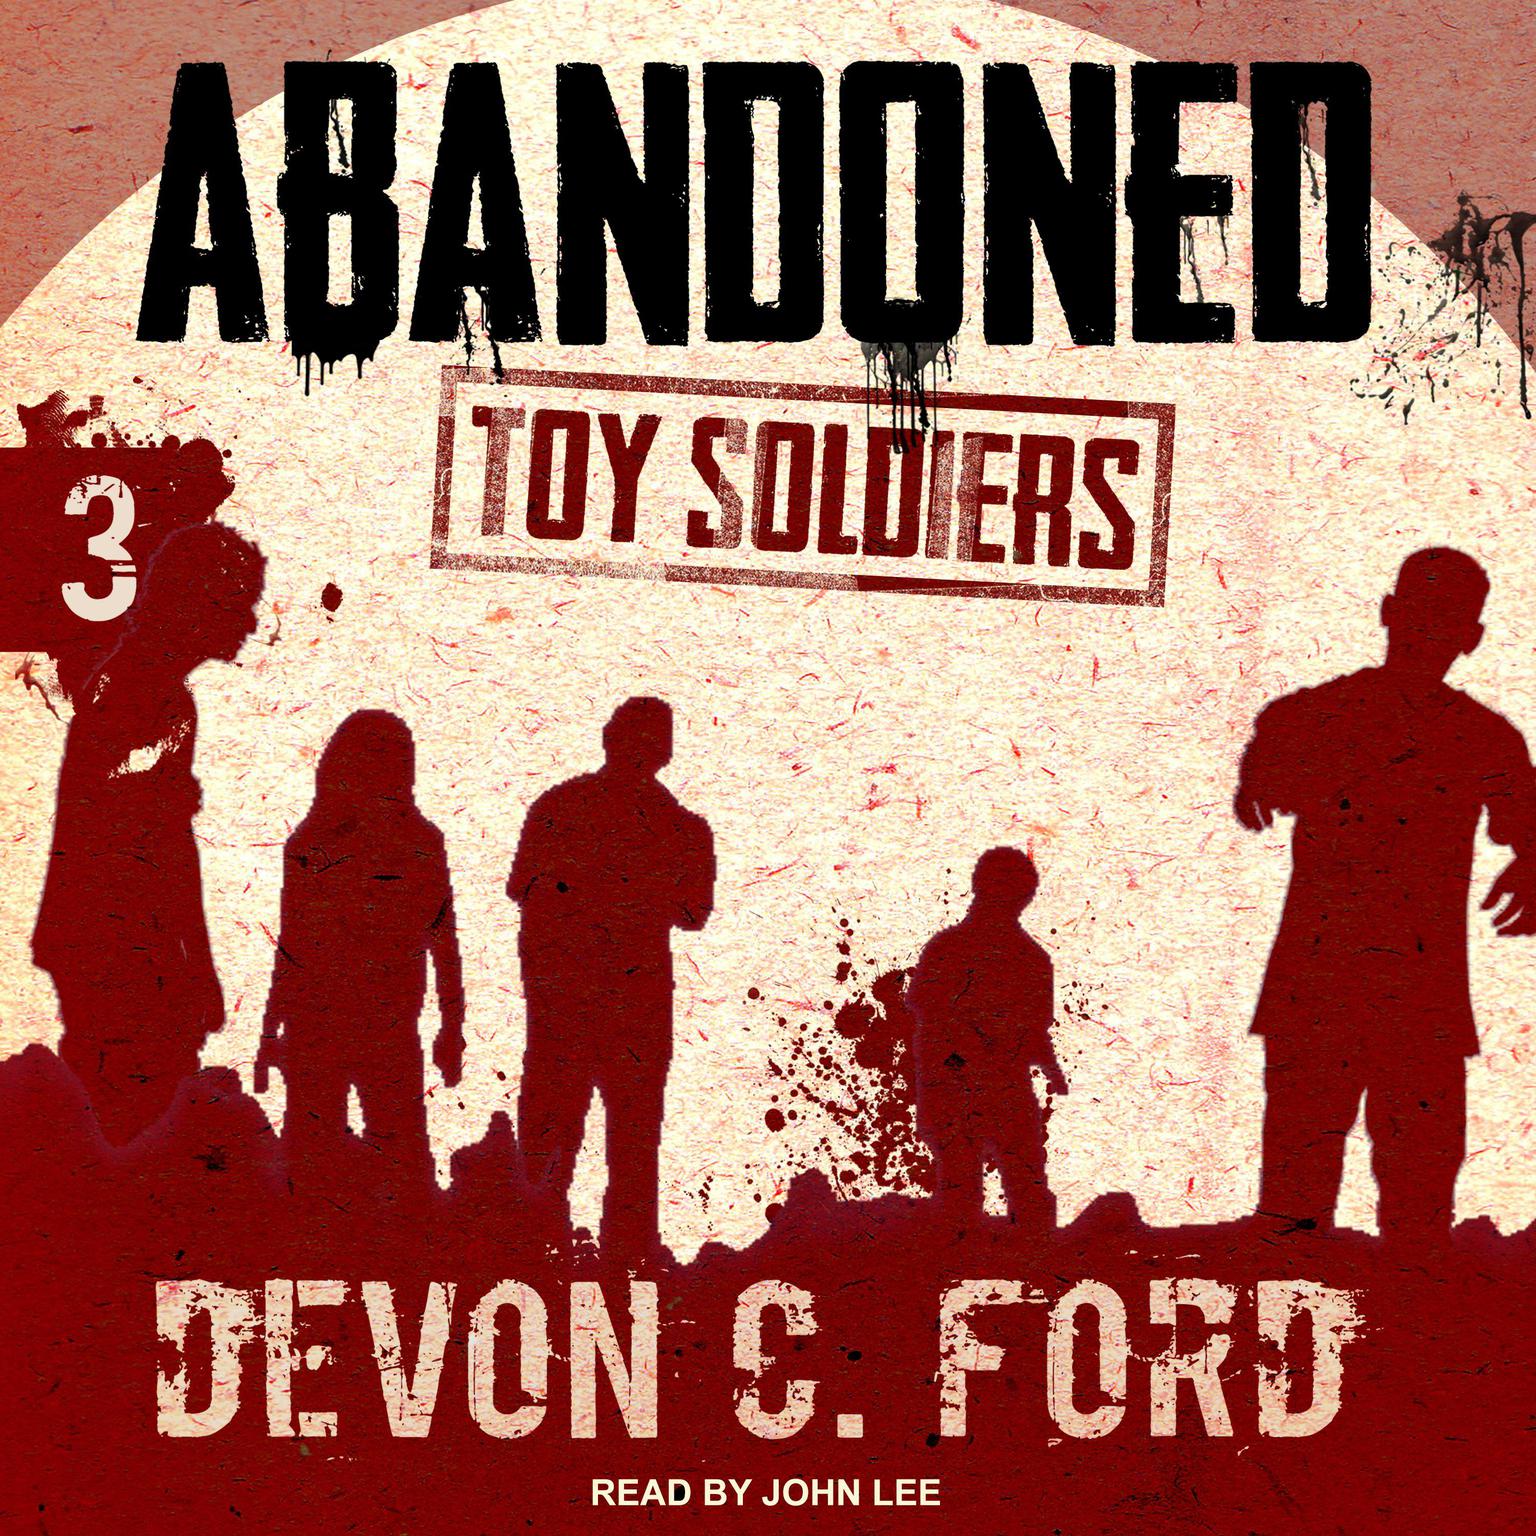 Abandoned Audiobook, by Devon C. Ford